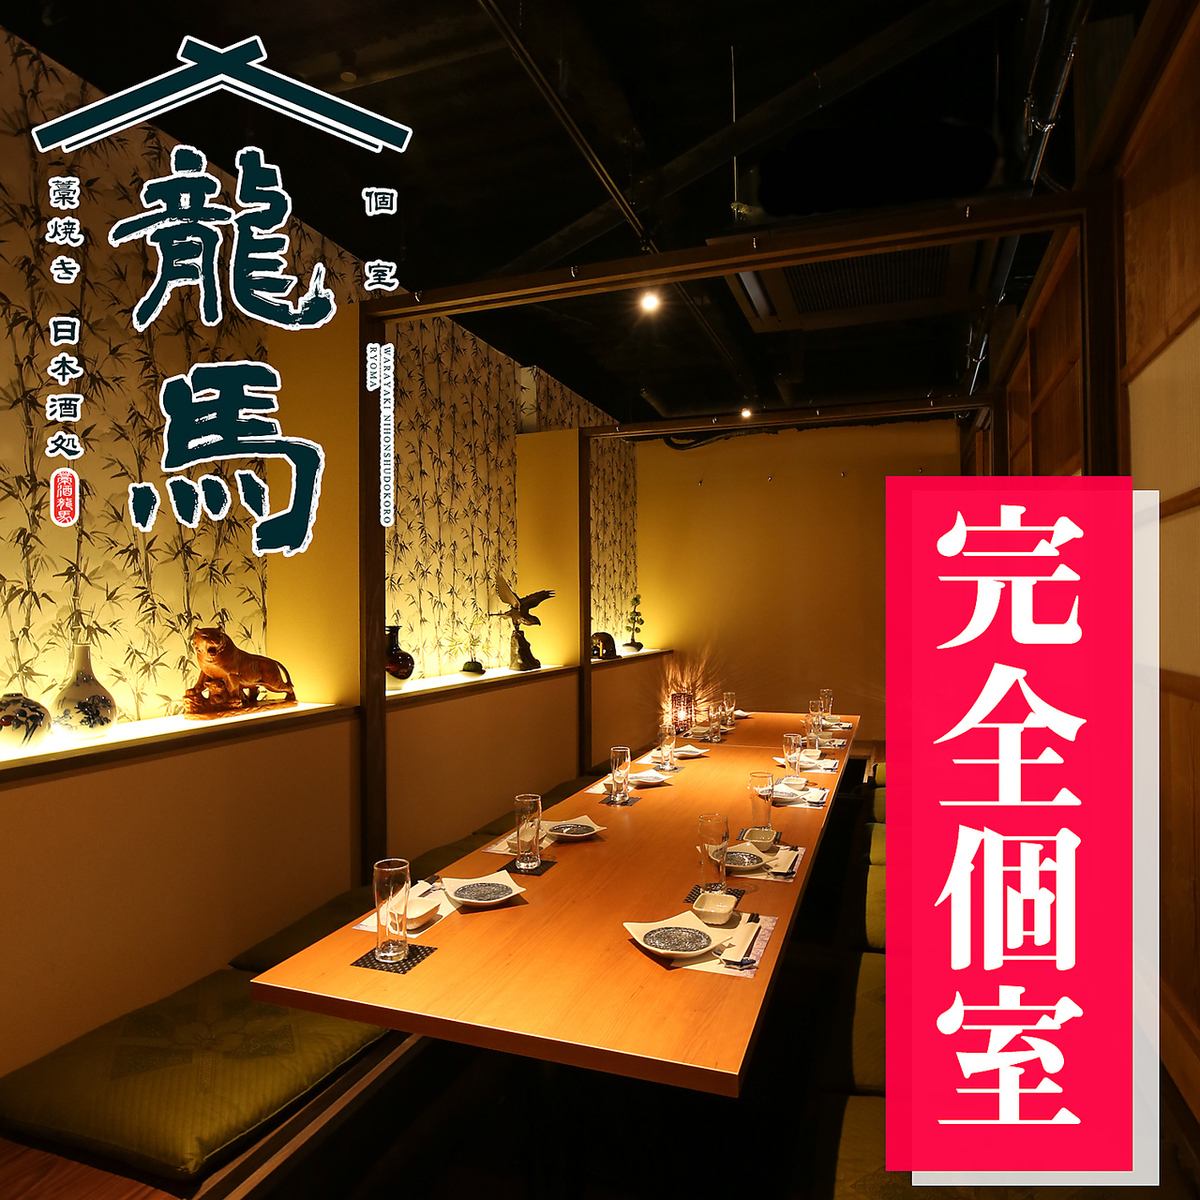 Banquet courses with all-you-can-drink are available from 3,500 yen! If you're looking for an izakaya with private rooms in Fukushima, head to "Ryoma"♪